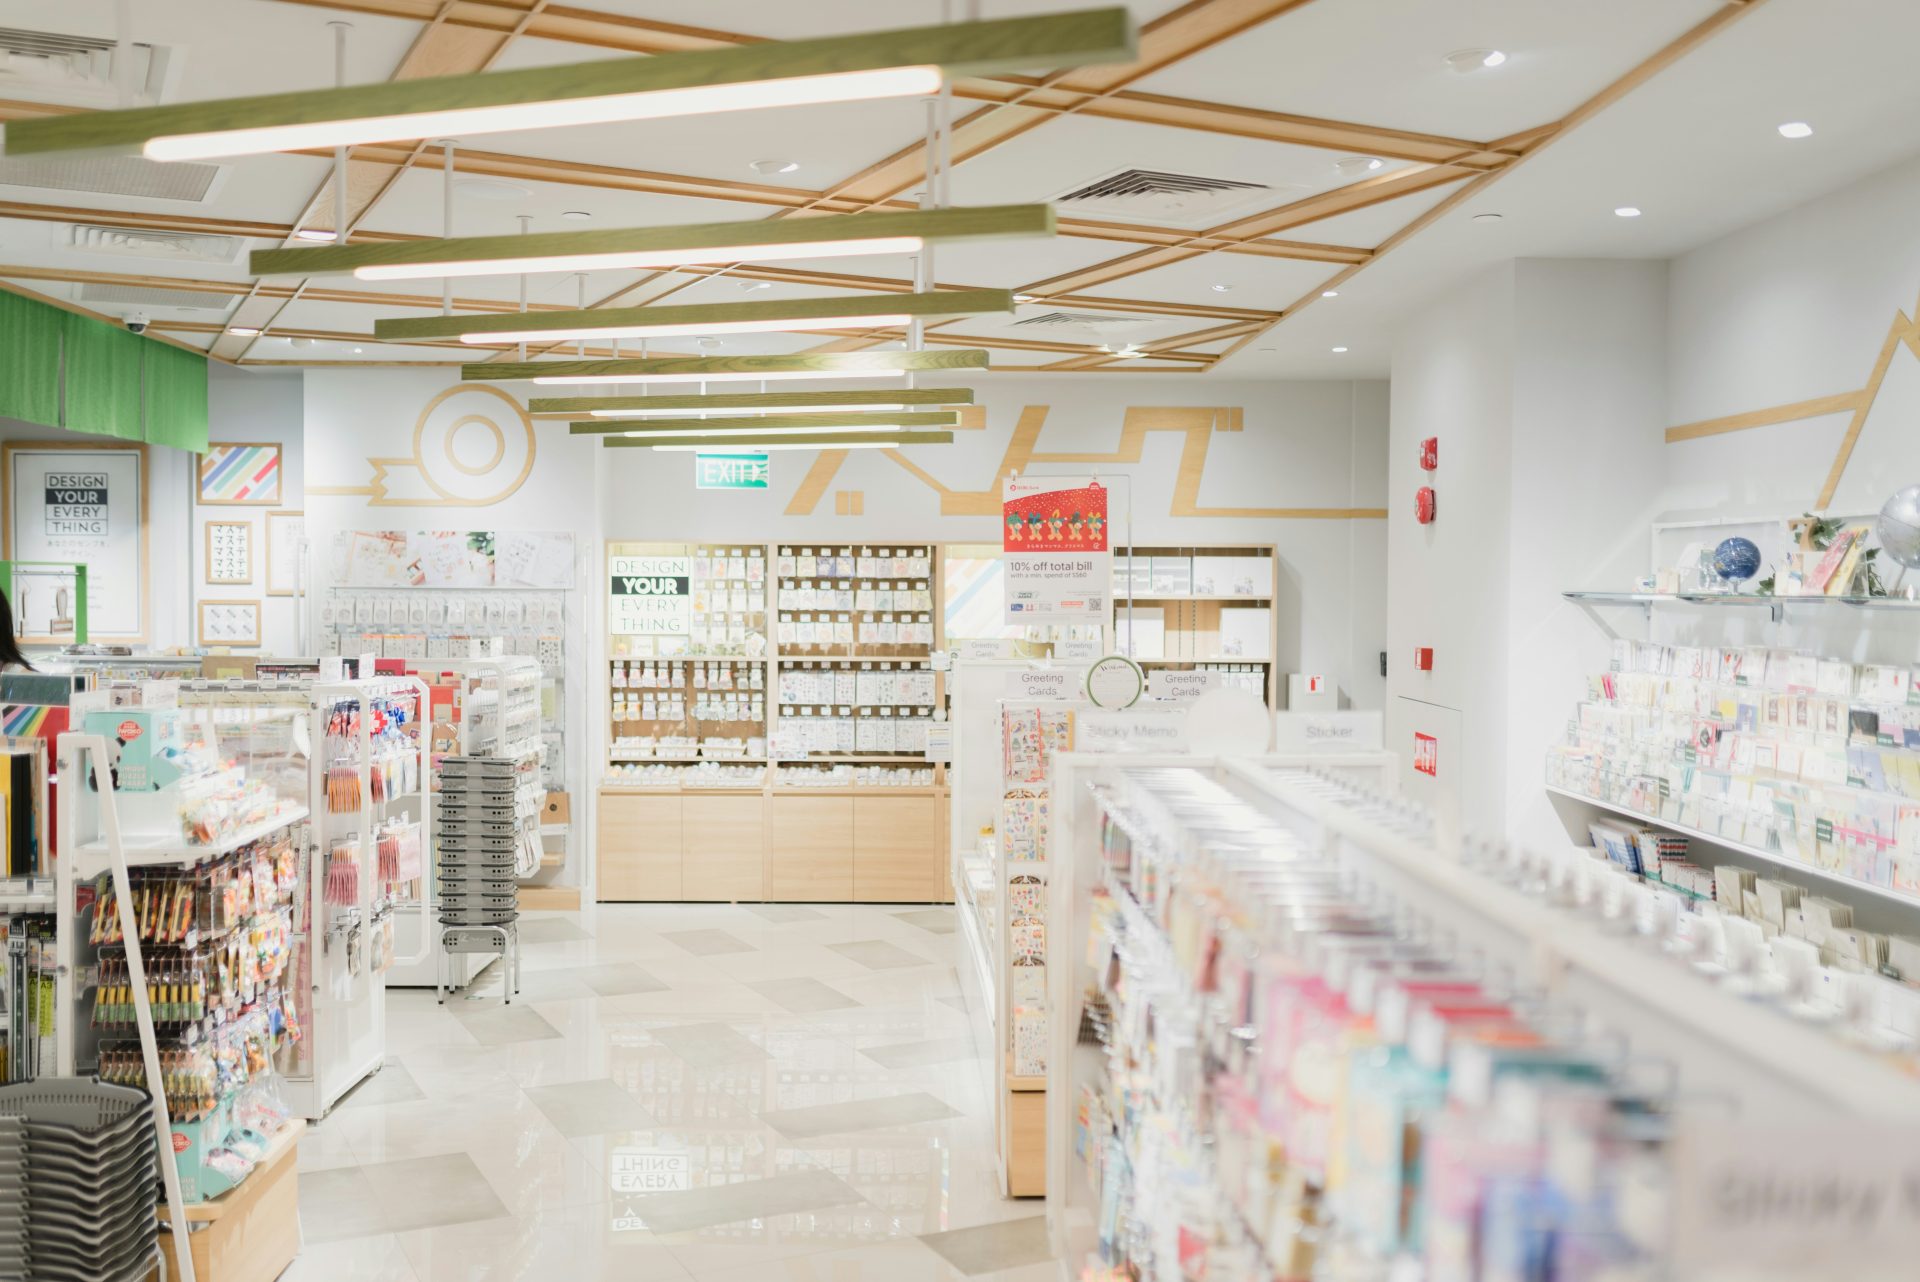 Pharmacies are increasingly becoming places of care and assistance in the area